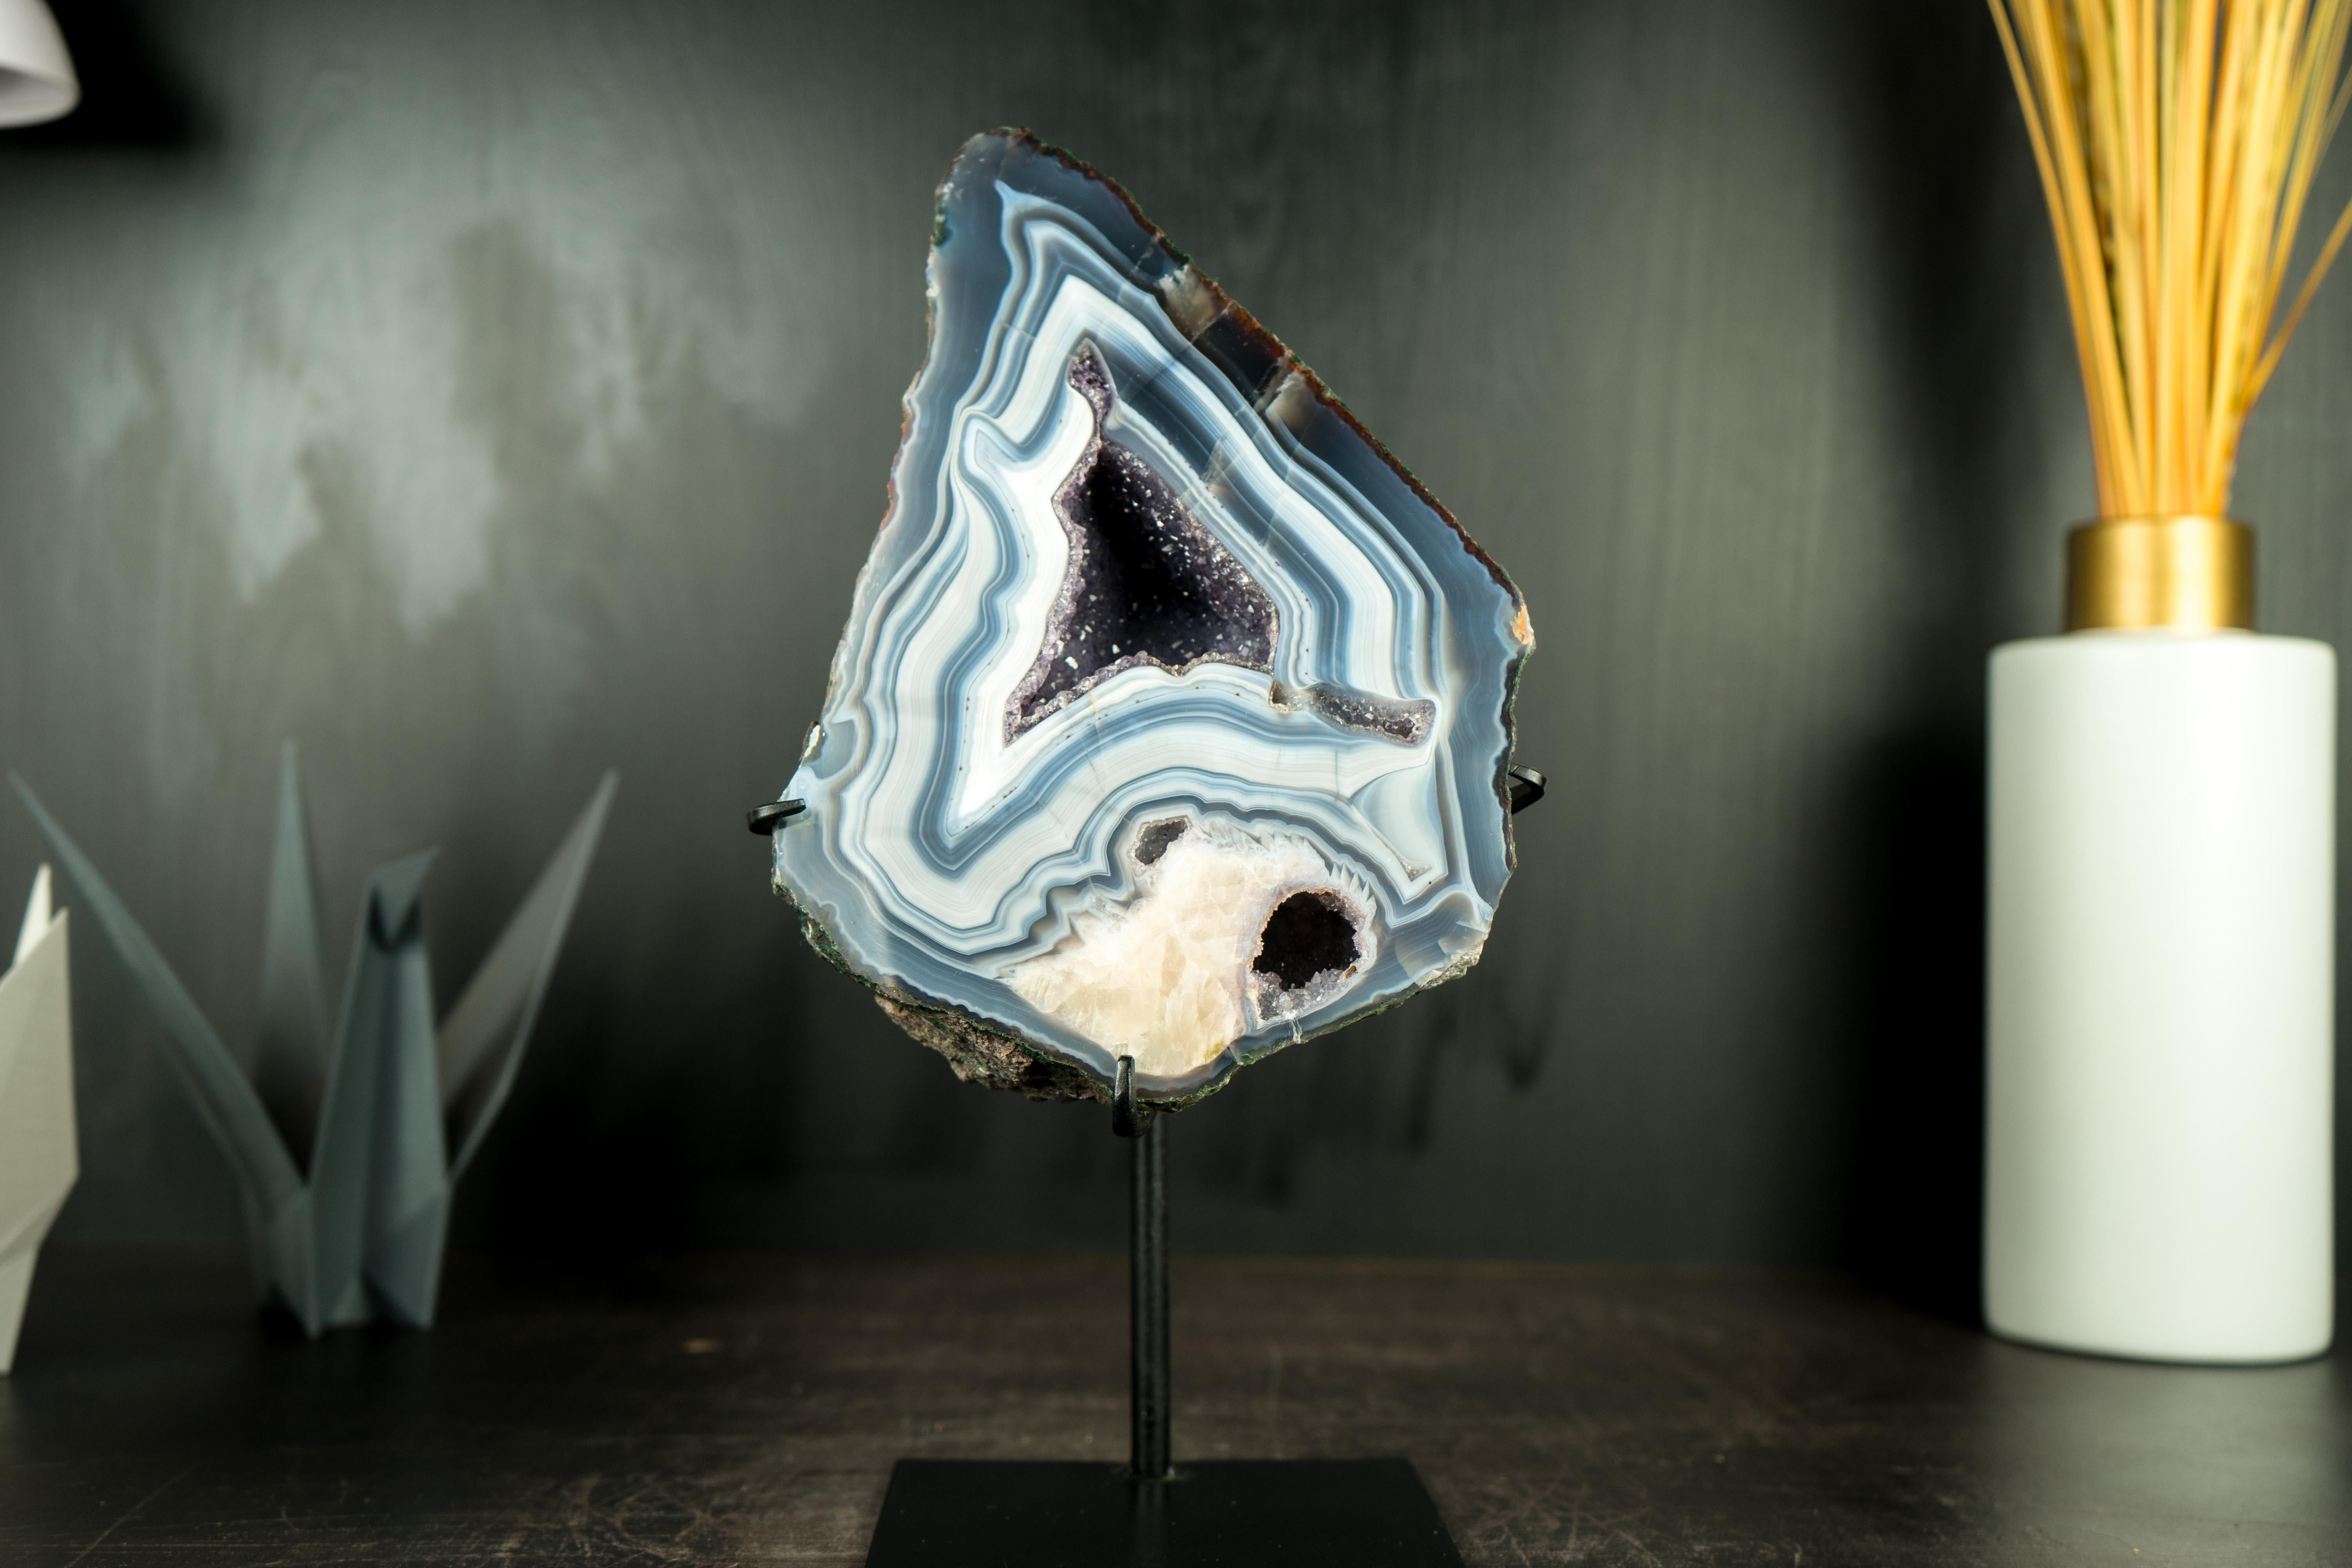 Collector's Blue Lace Agate Geode: A Harmonious Agate with Rare Formation, Bold White and Blue Laces, and a Calcite Flower Inclusion

▫️ Description

An artwork crafted by nature, this rare and remarkable Agate Geode has beautifully taken the shape